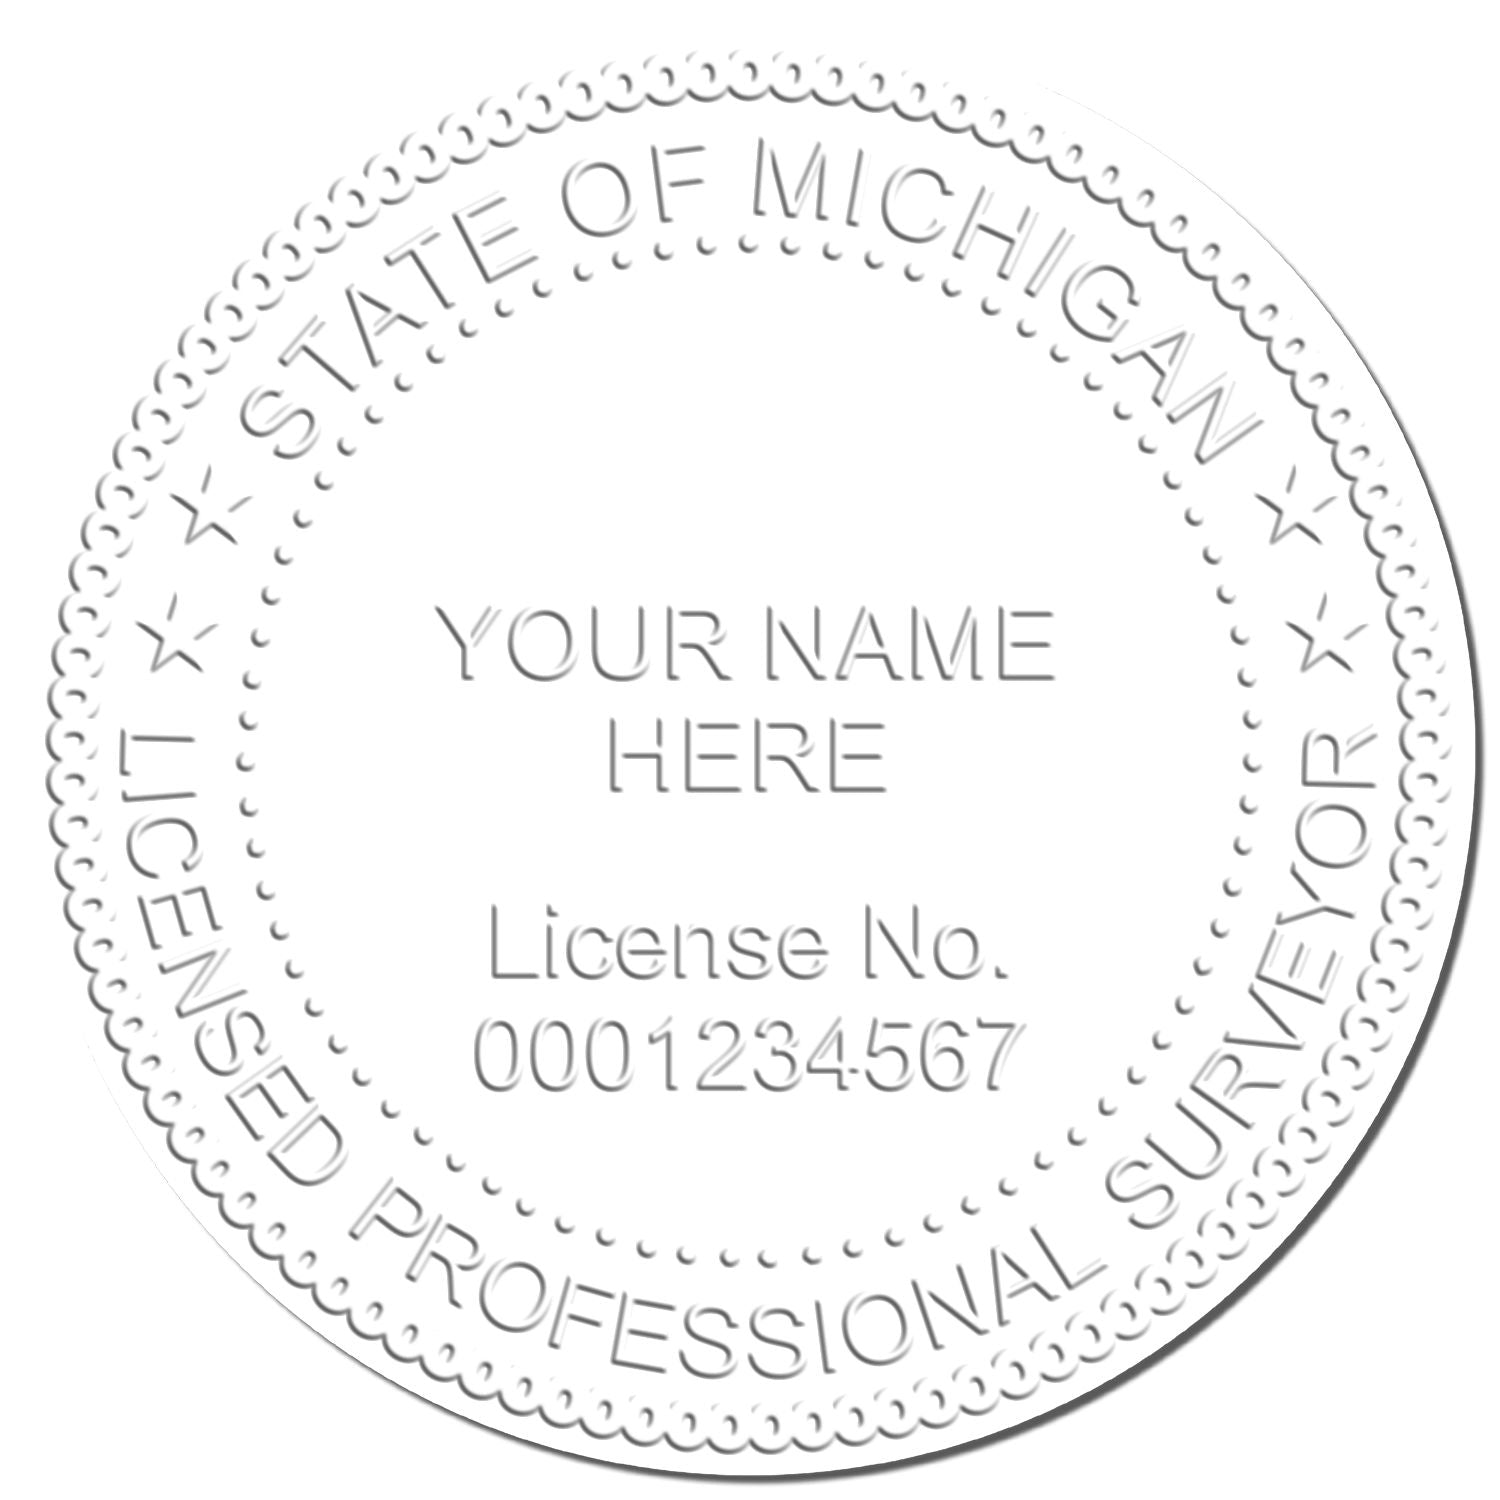 The main image for the Long Reach Michigan Land Surveyor Seal depicting a sample of the imprint and electronic files